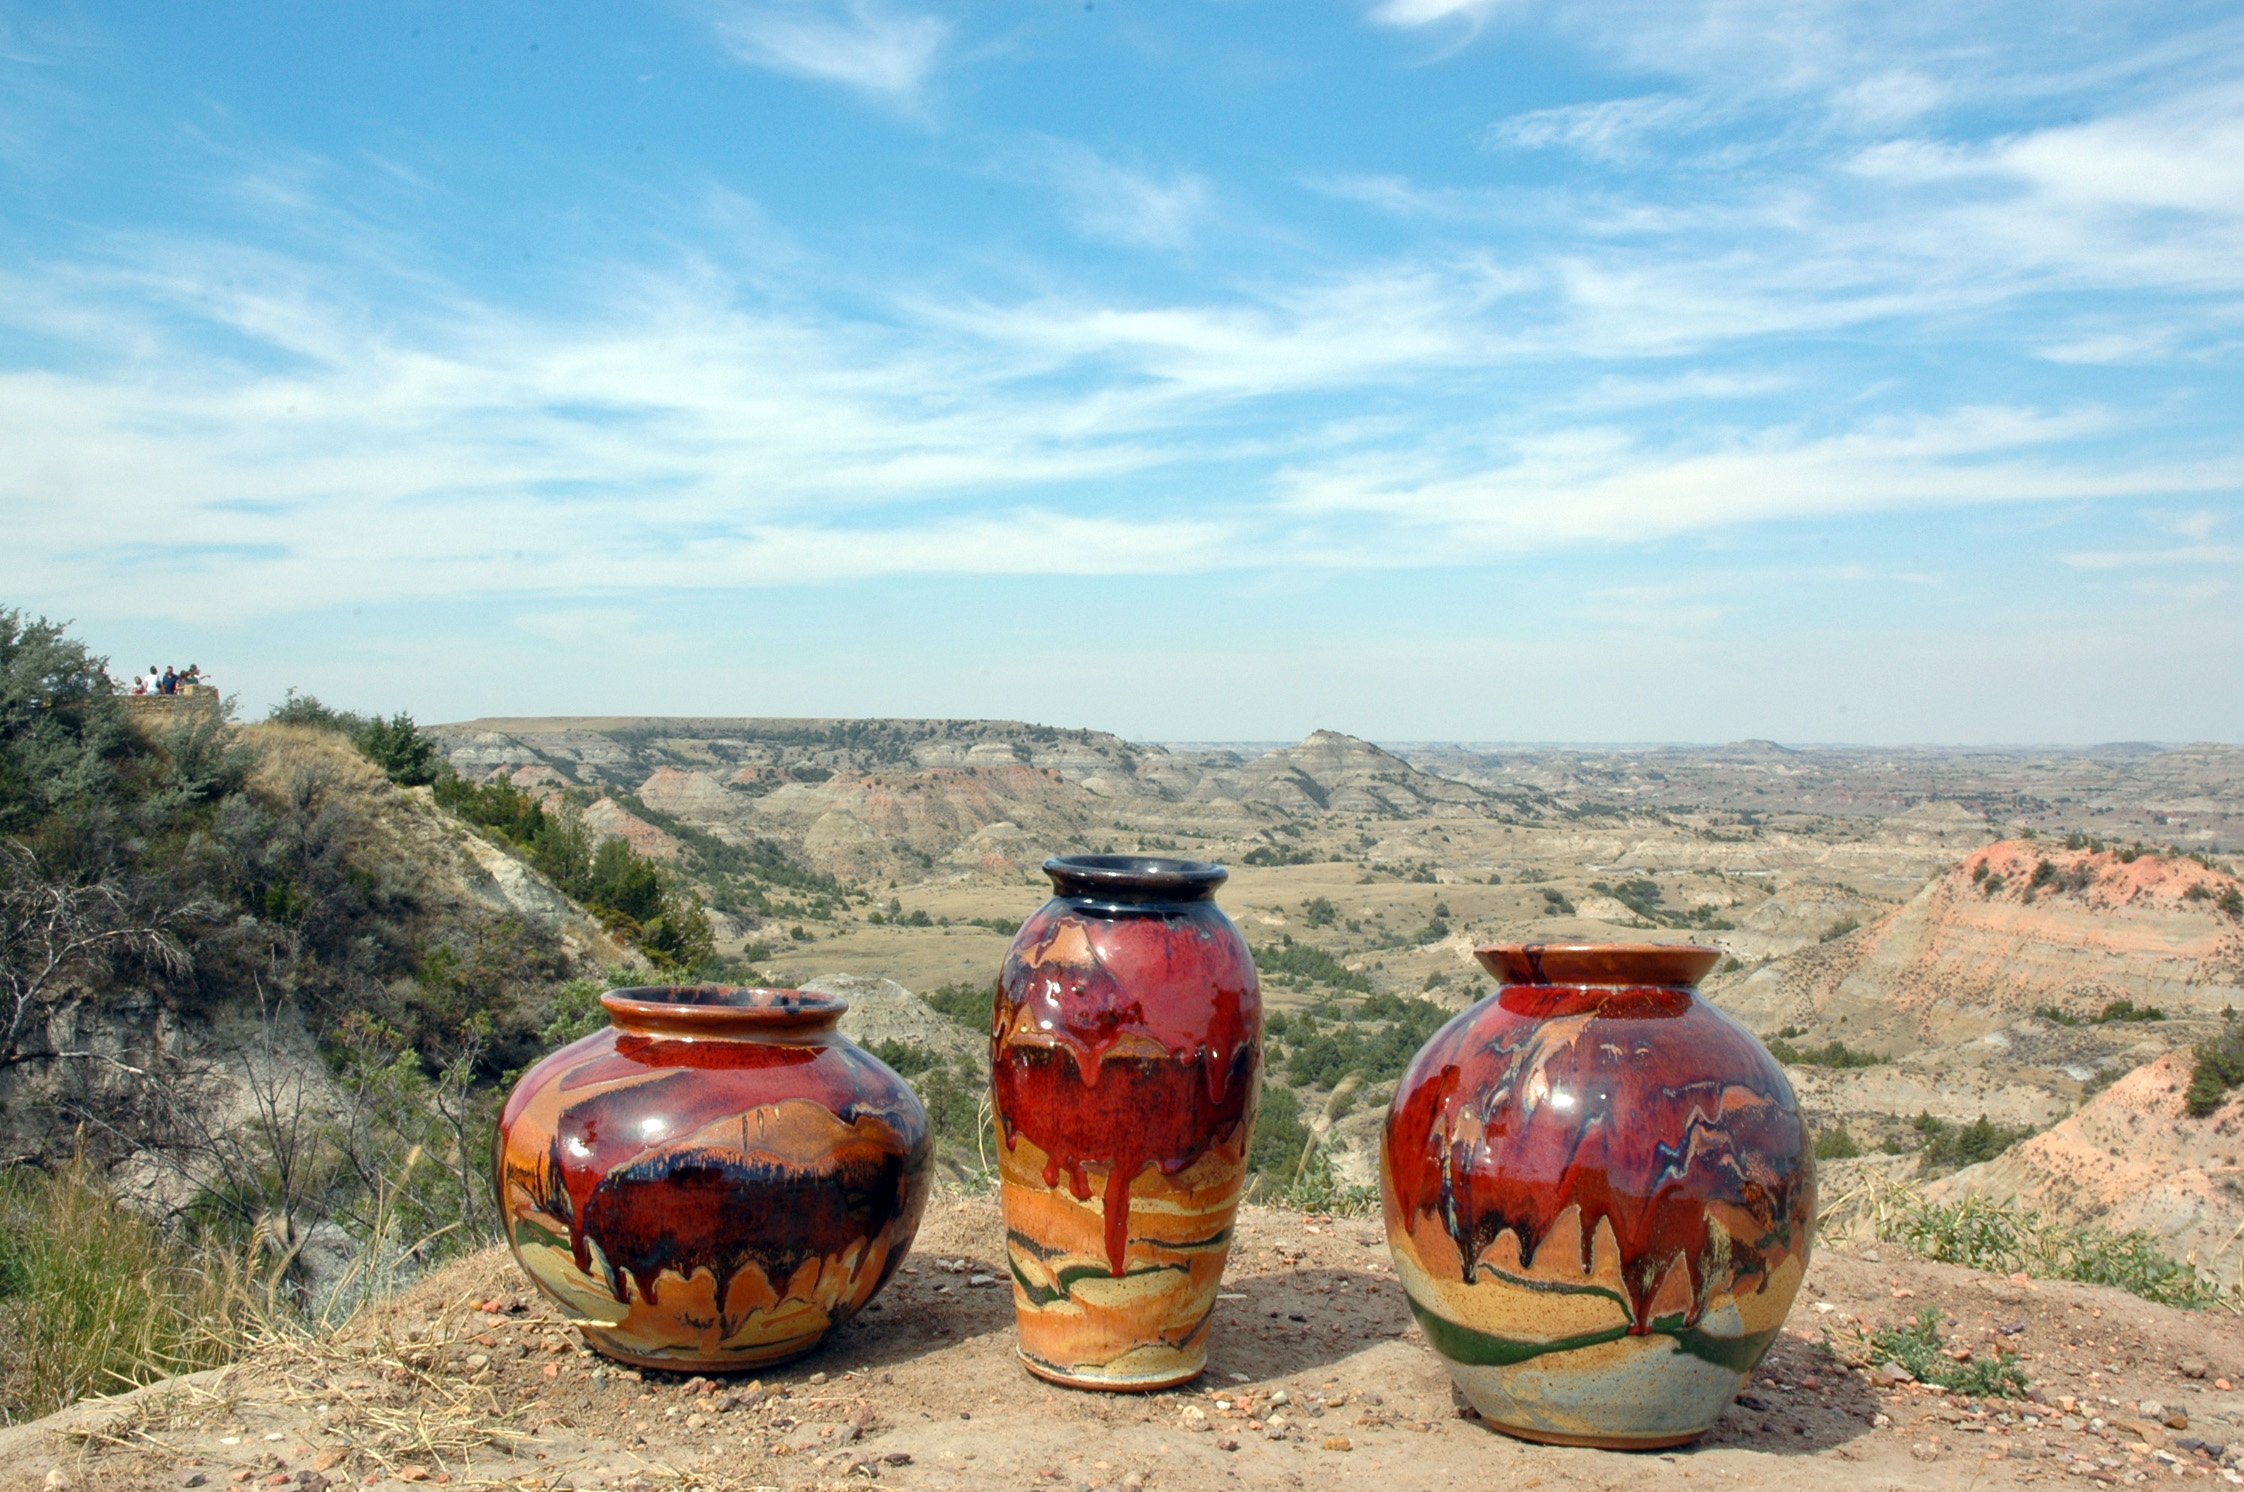 Smith's pottery and the landscape which inspires it, 'striped in the colors of red, tan and black by prairie fires'